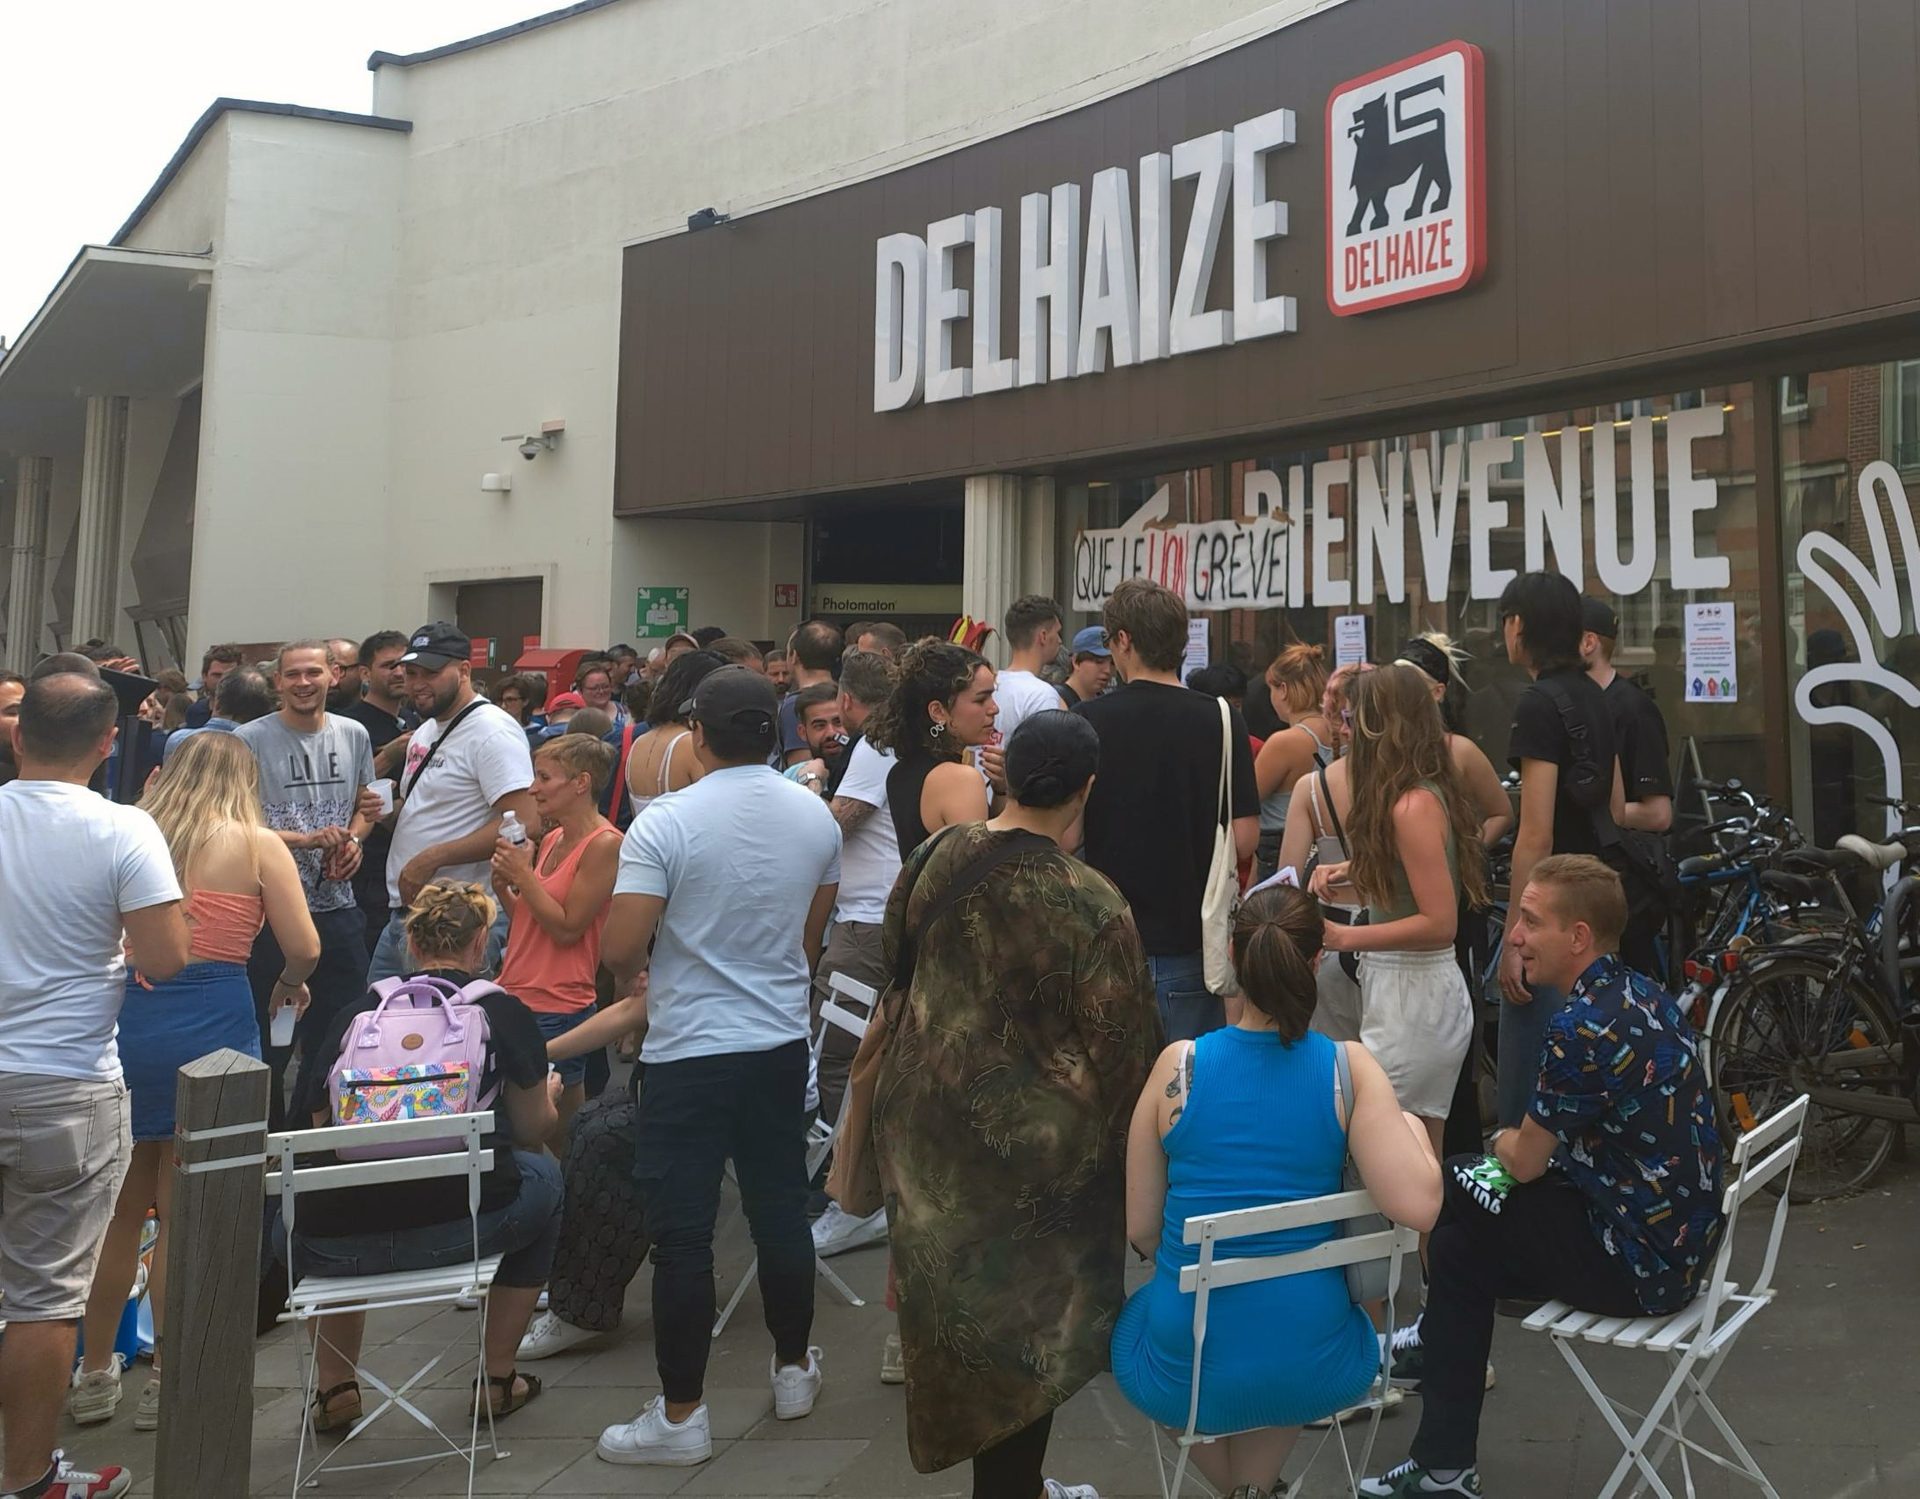 'Not giving up the fight': Several Delhaize supermarkets in Brussels go on strike again